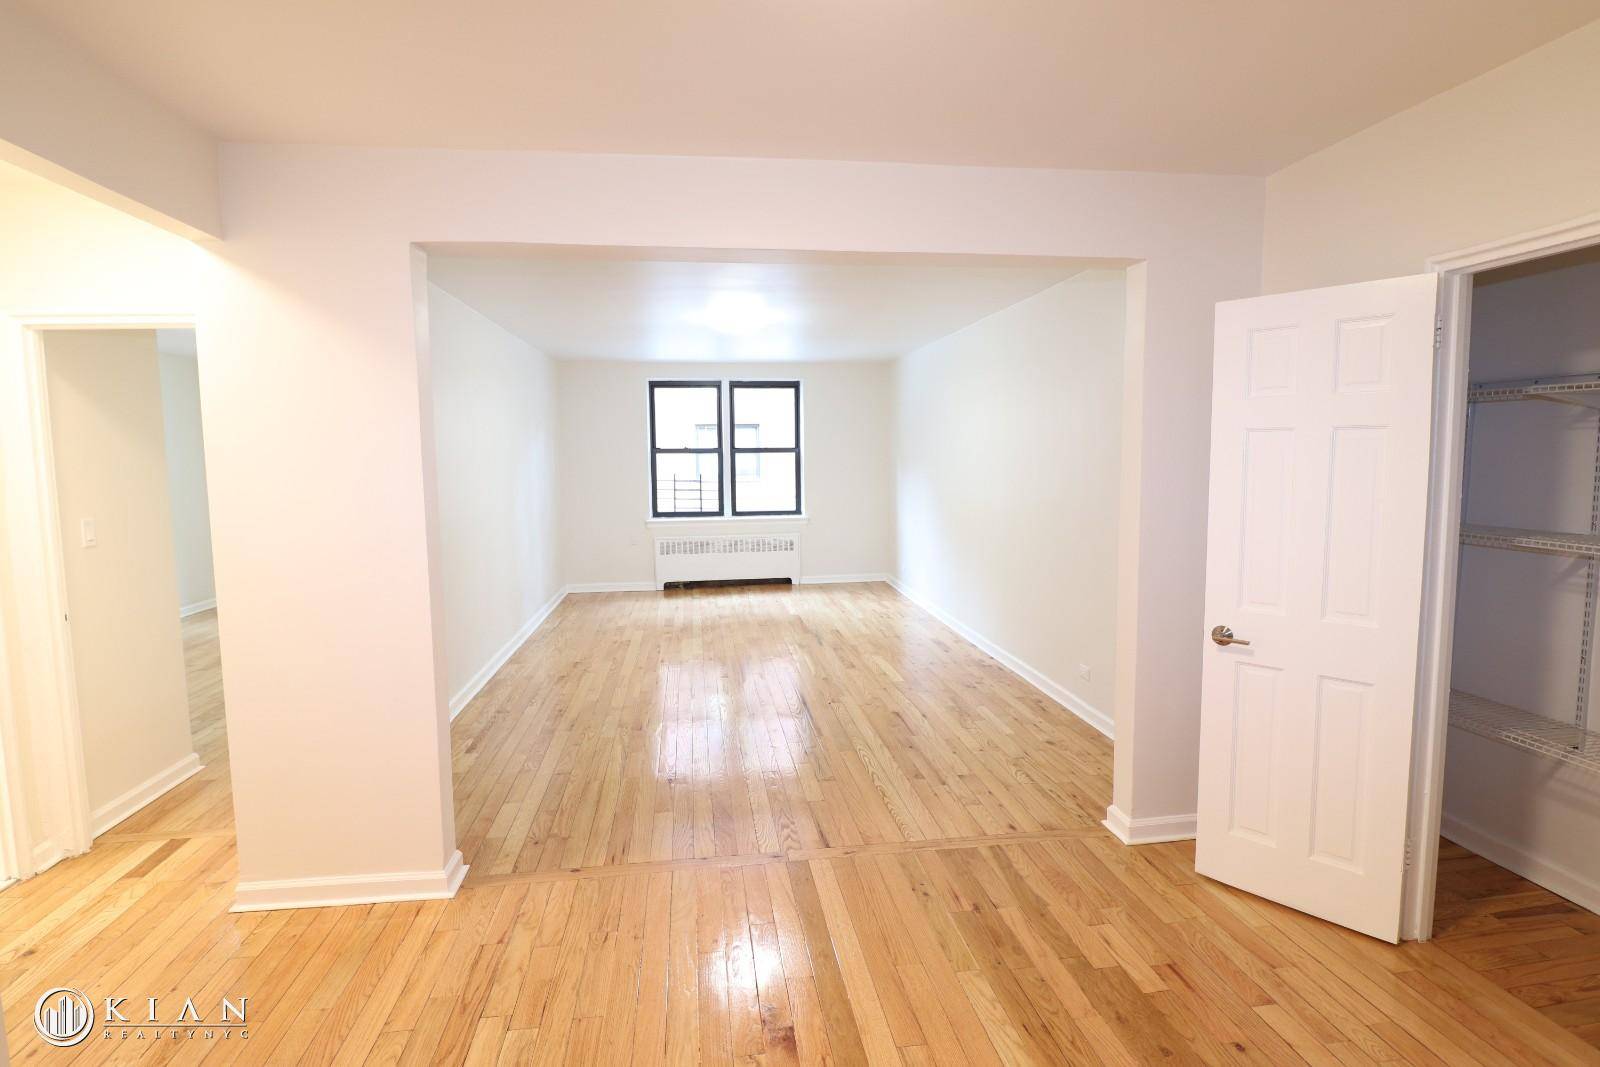 NO BROKER FEE ! Huge 1 bedroom brand new renovated apartment located in very well maintained elevator building with laundry inside of the building.